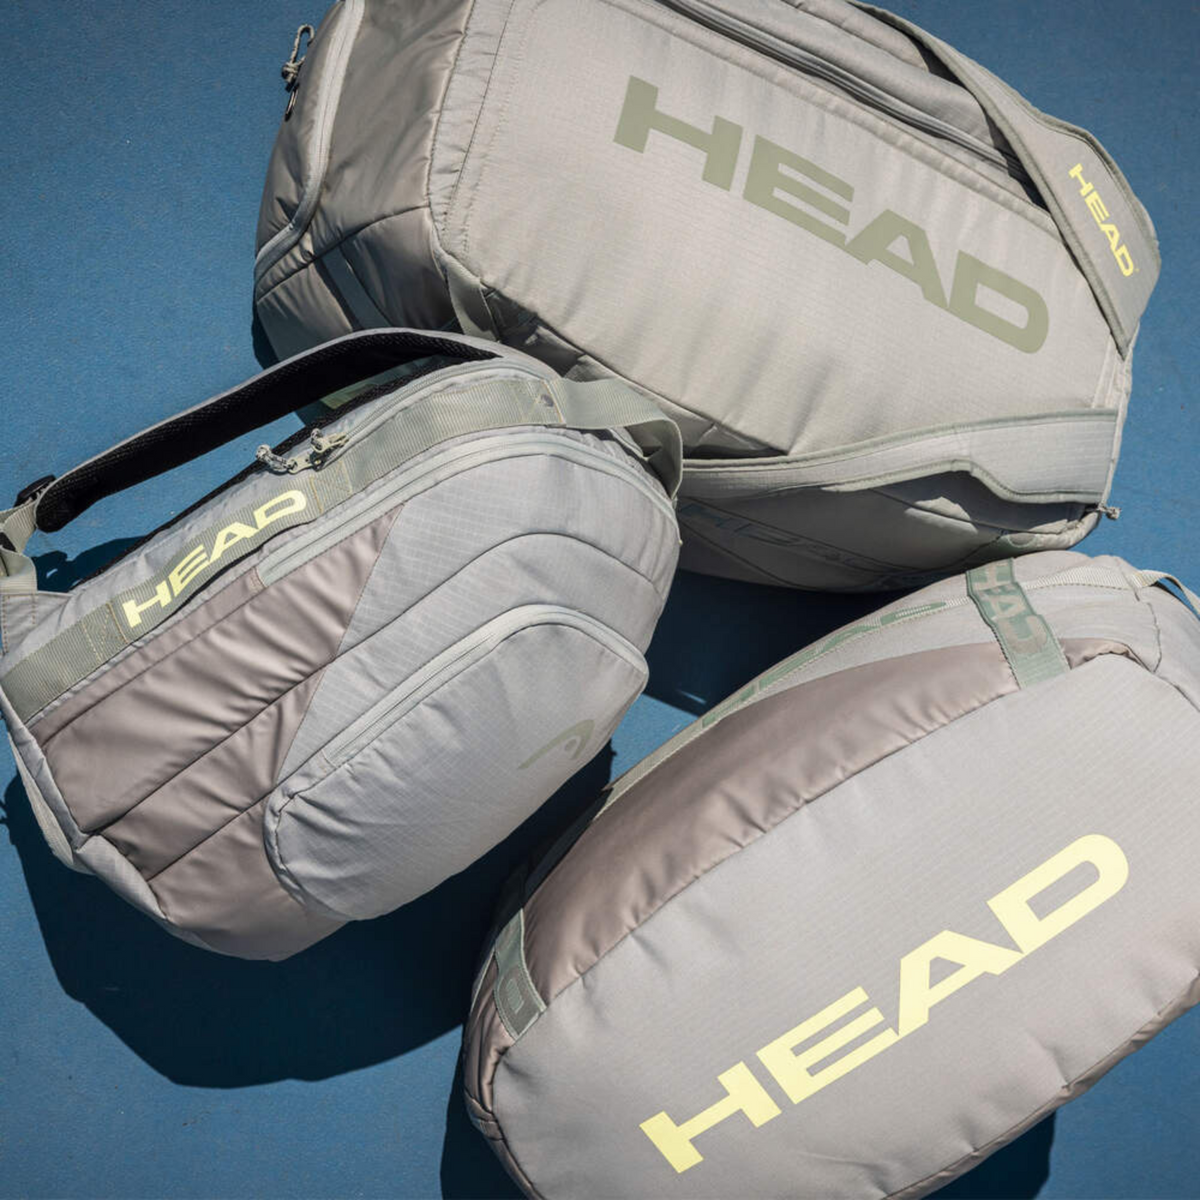 Lifestyle photo of tennis bags from HEAD